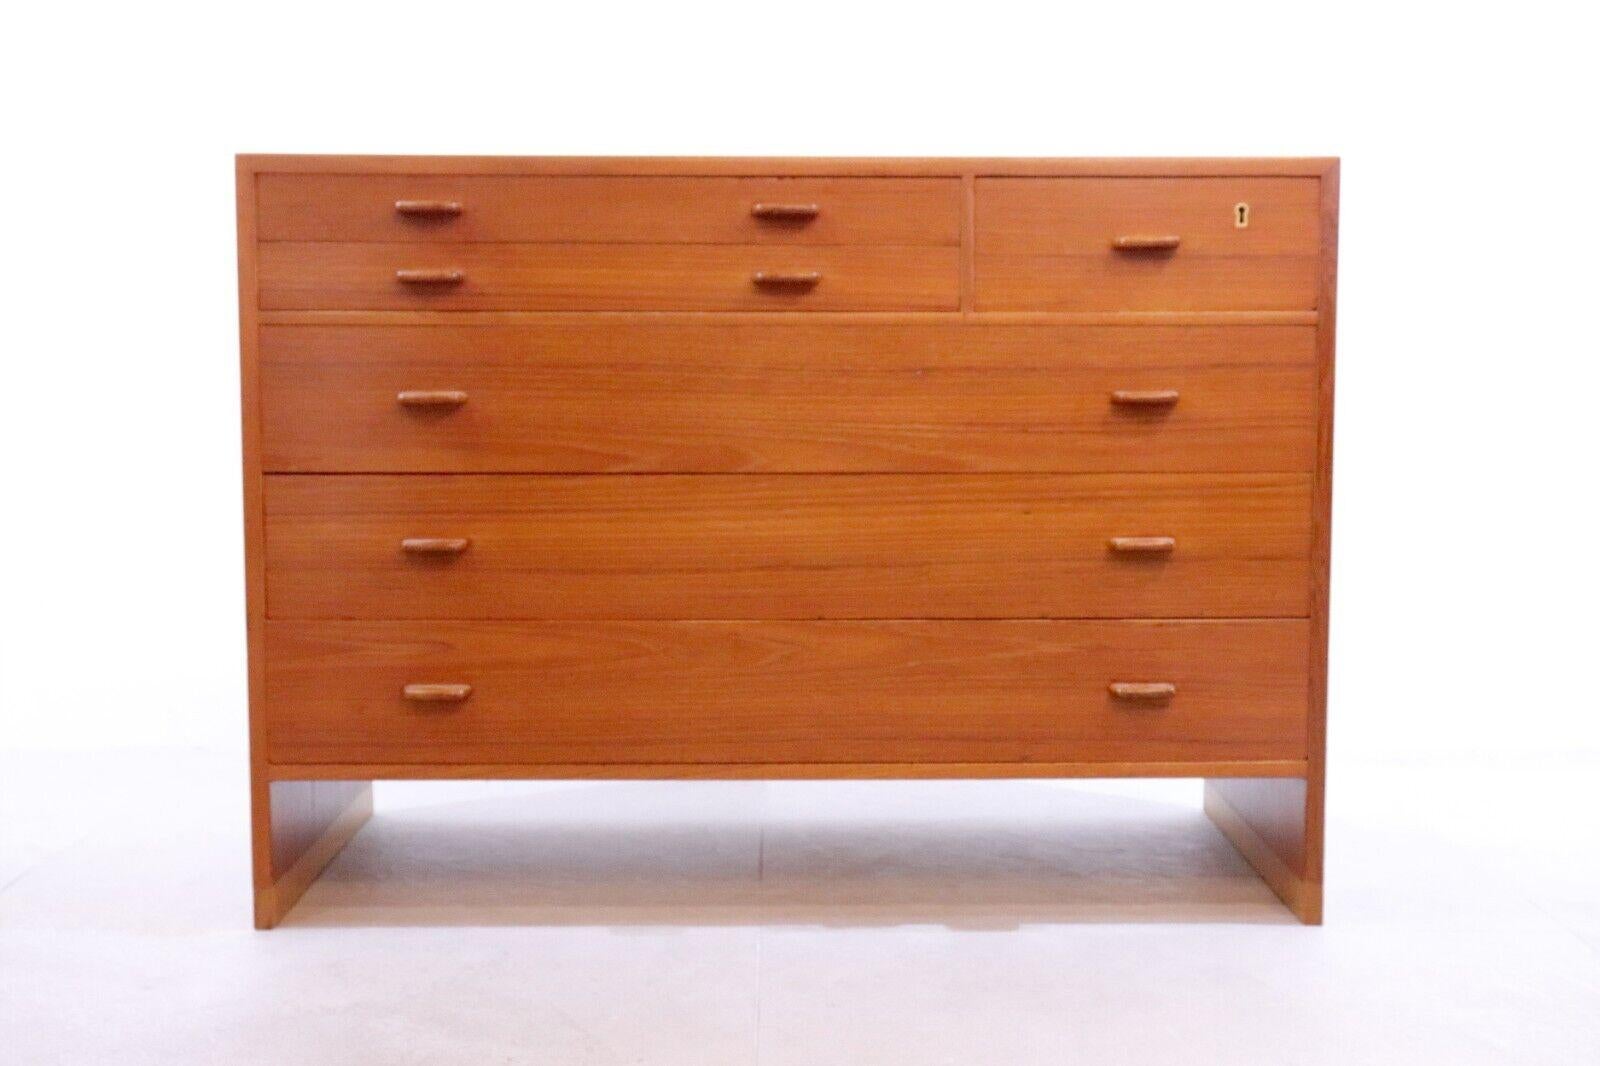 Hans Wegner teak chest of drawers for Ry Møbler, 1955; a simplistic, sturdy and aesthetic design, The warm wooden colour works for any interior and is ideal for a bedroom, office or even a console table. With storage which facilitate clothing, files